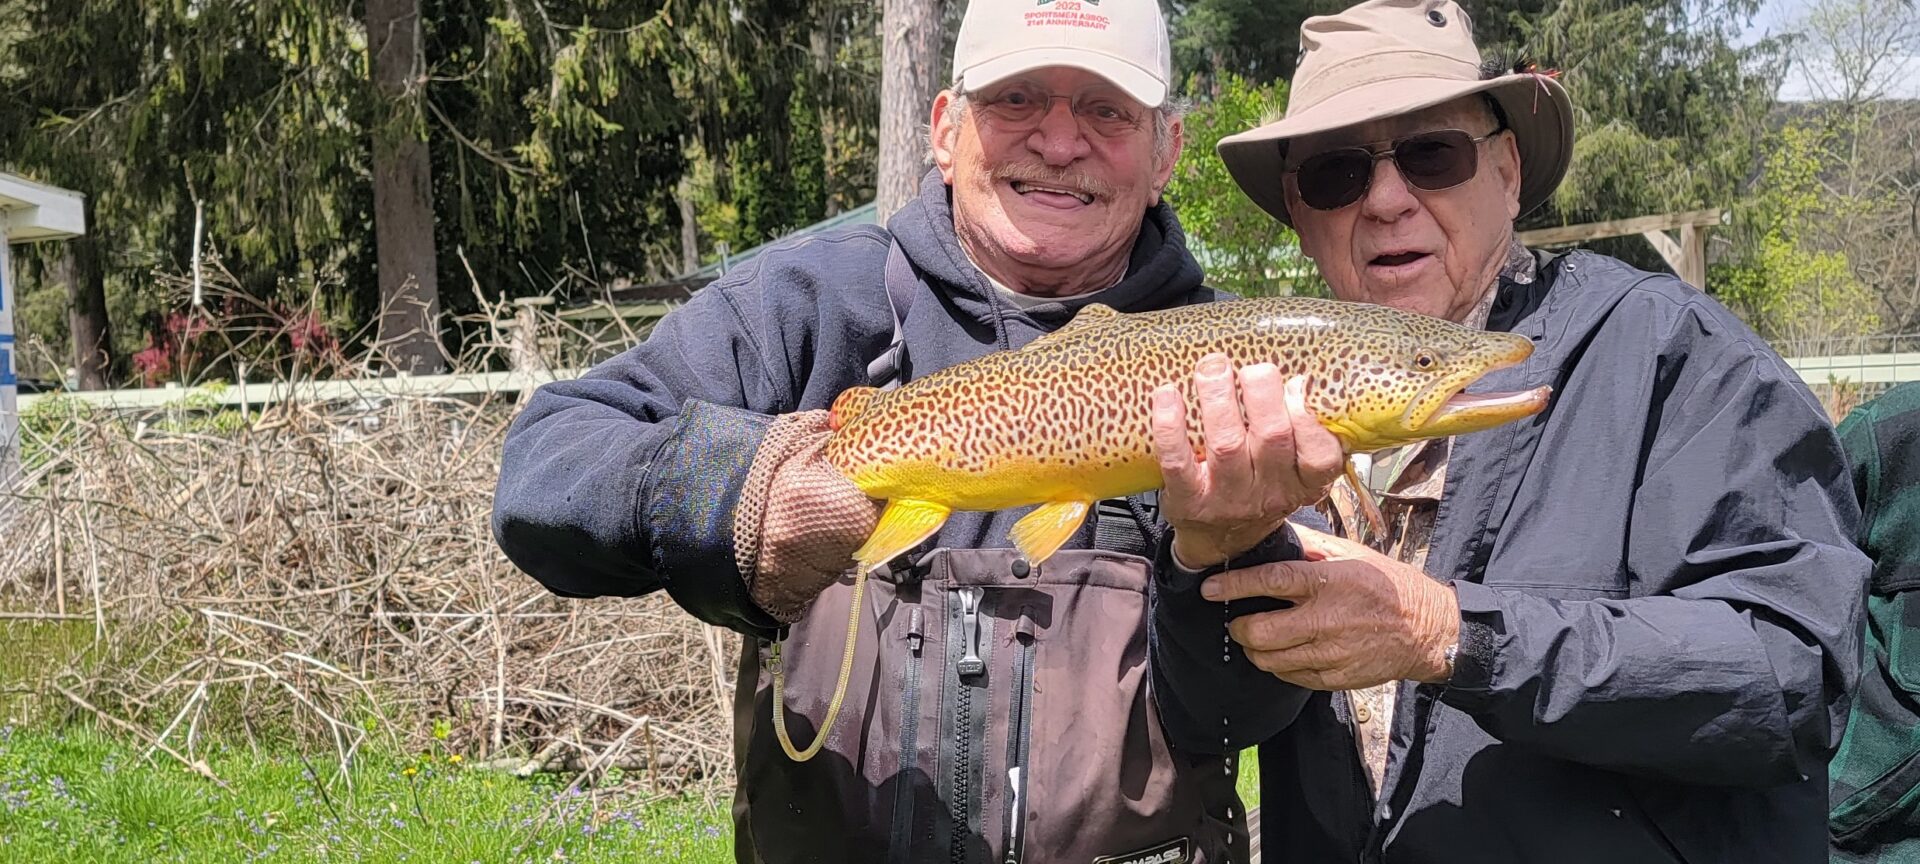 Fred and Deane with Big Brown Trout